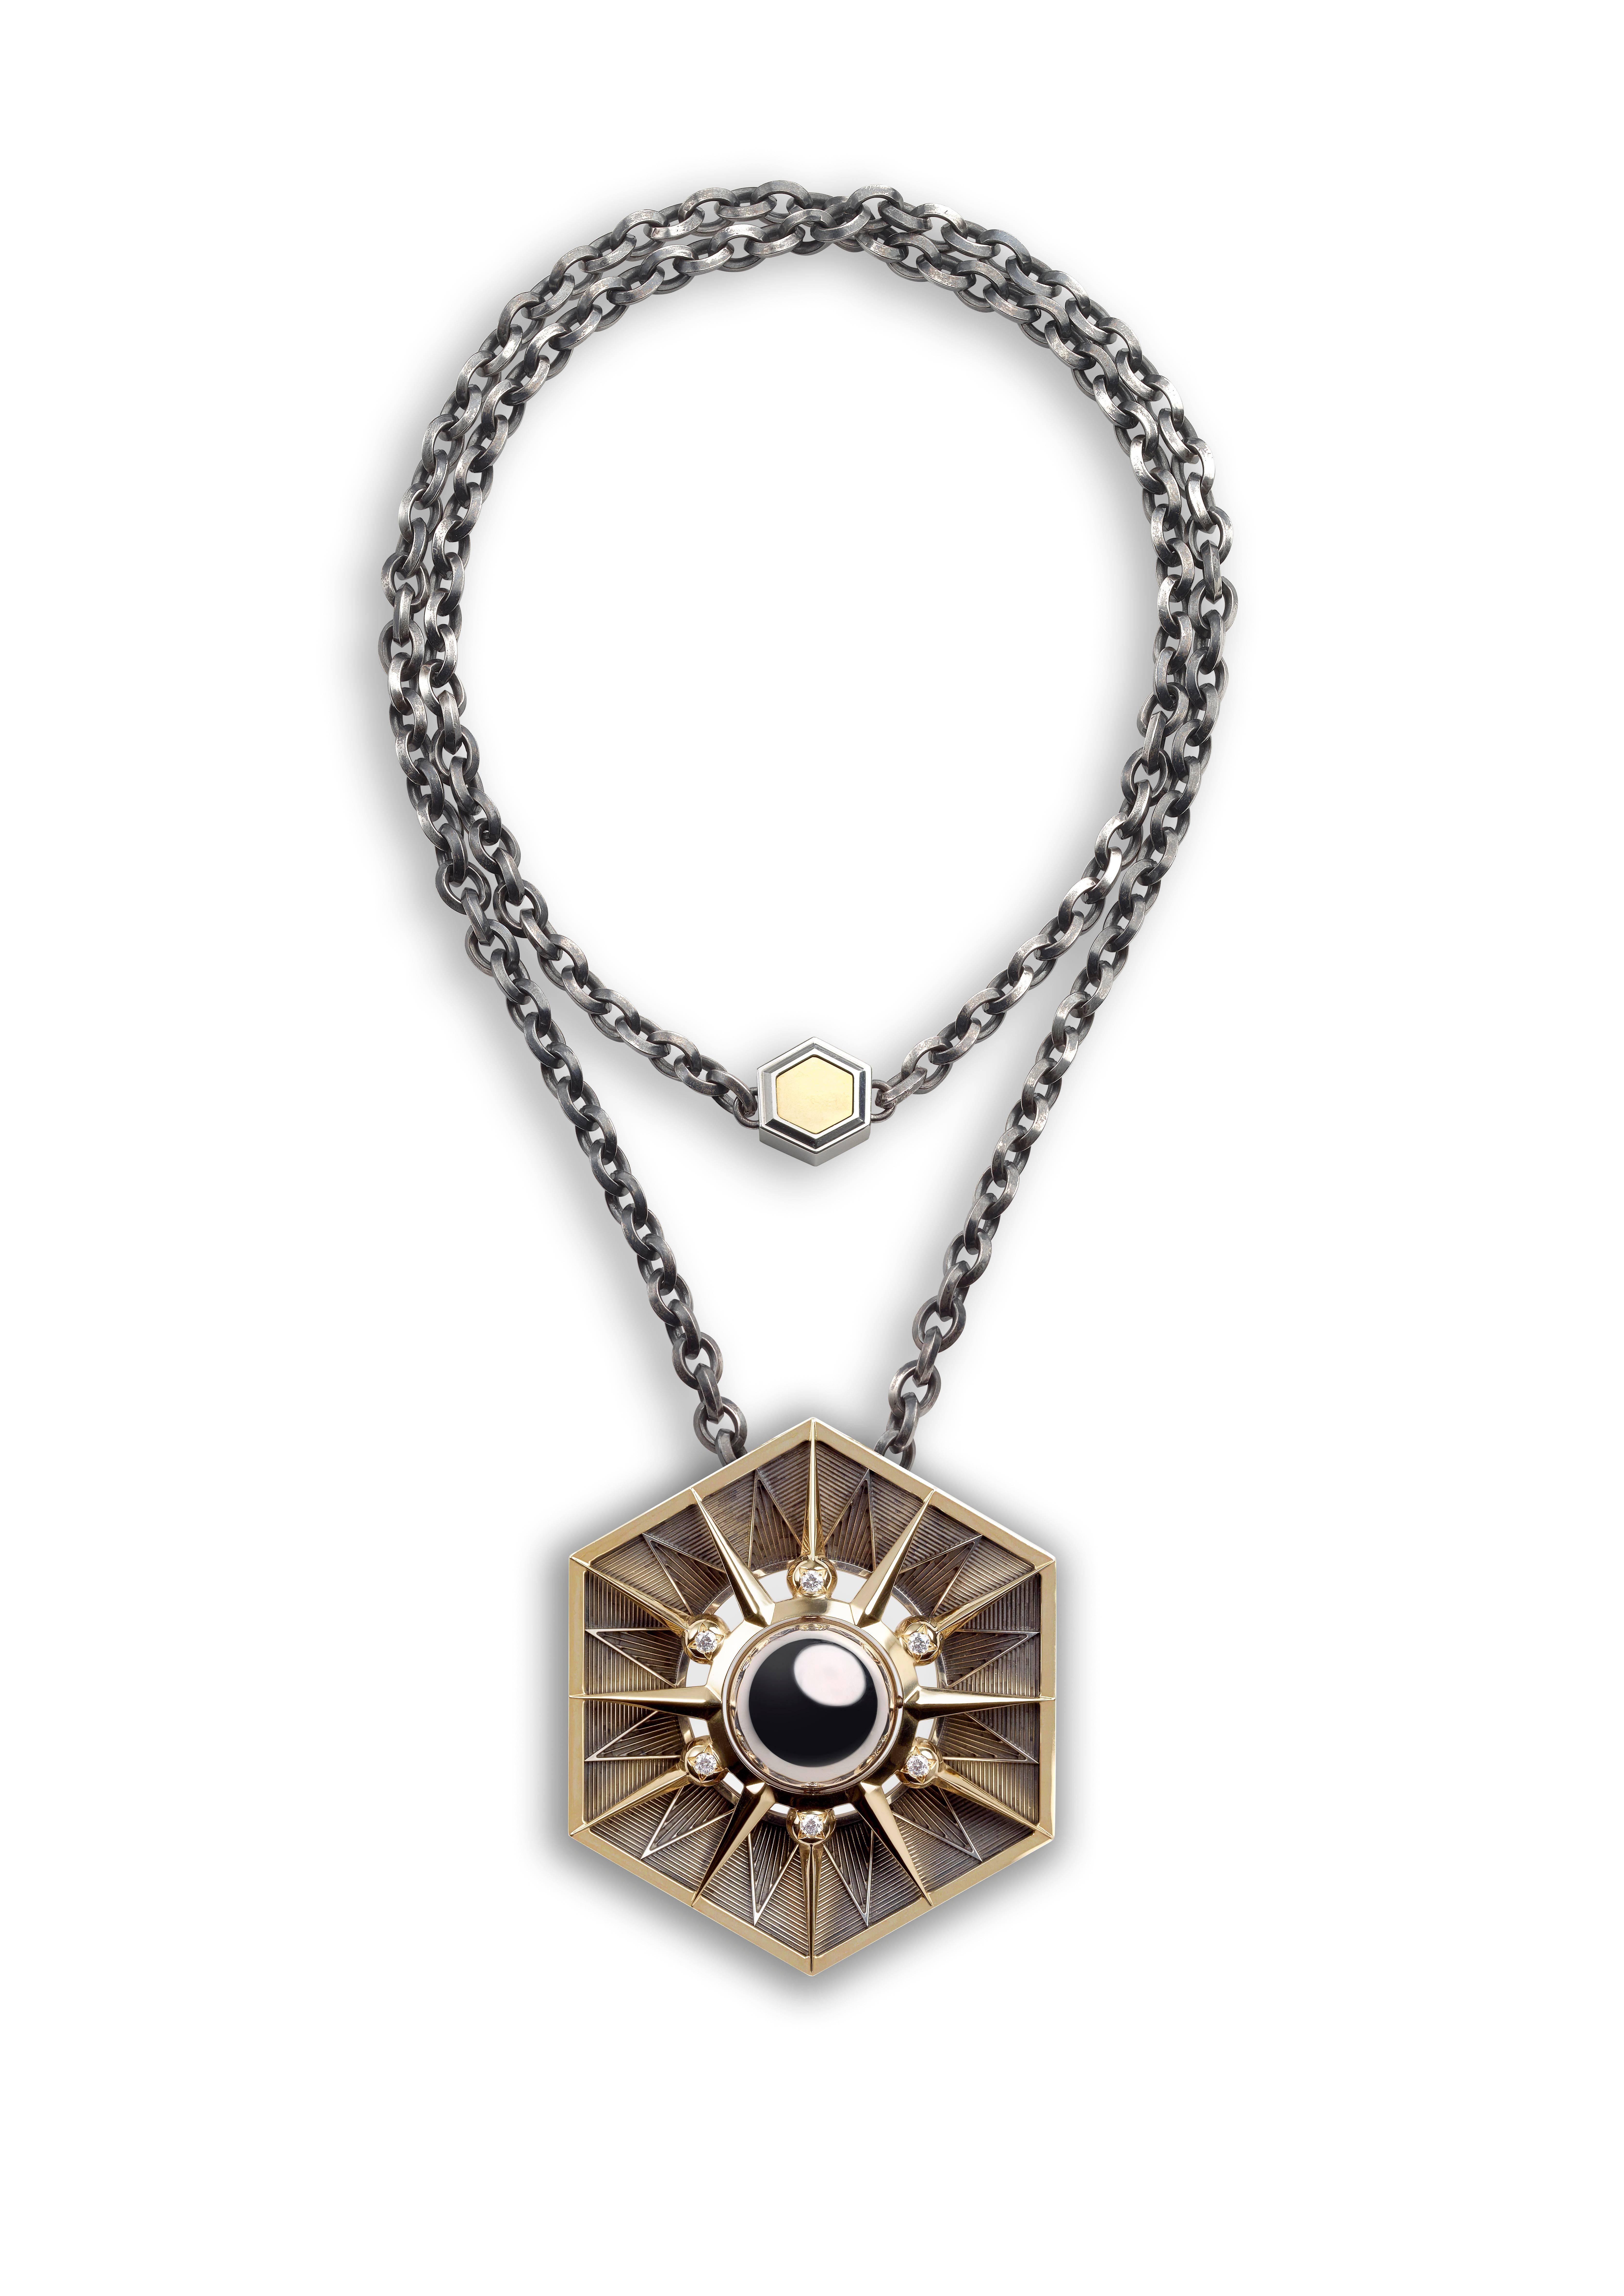 Necklace comprising a patinated silver chain and an octagonal yellow gold pendant. An onyx disc at the centre of a yellow gold star, set in a pivoting half-sphere to be worn two different ways: all gold and silver or gold and onyx. The stars of the